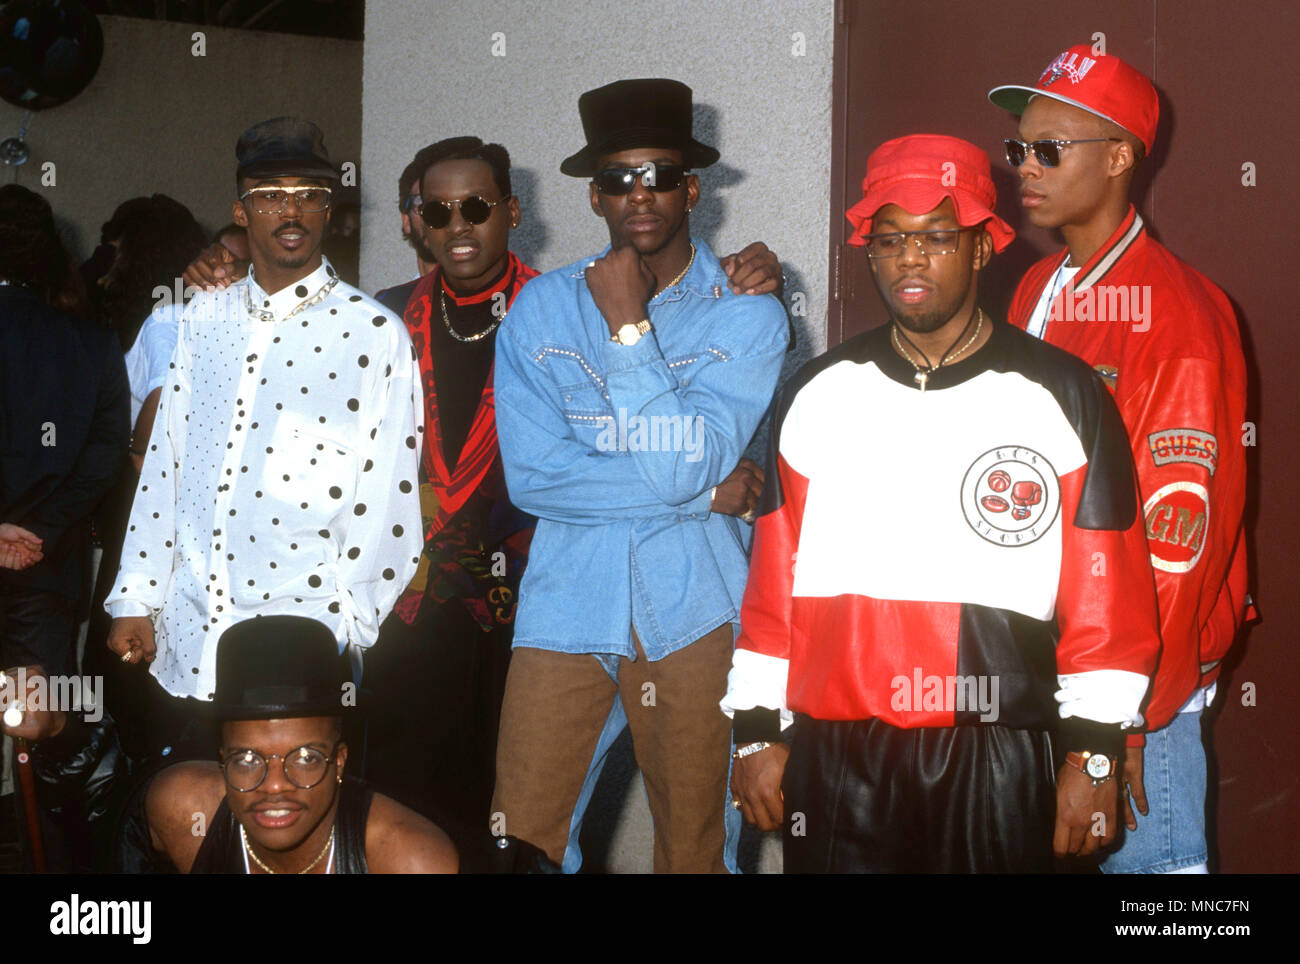 UNIVERSAL CITY, CA - SEPTEMBER 6: (L-R) Singers/musicians Ralph Tresvant, Ricky Bell, Johnny Gill, Bobby Brown, RIcky Bell, Michael Bivinsand Ronnie DeVoe of New Edition attend the Seventh Annual MTV Video Music Awards on September 6, 1990 at Universal Amphitheatre in Universal City, California. Photo by Barry King/Alamy Stock Photo Stock Photo